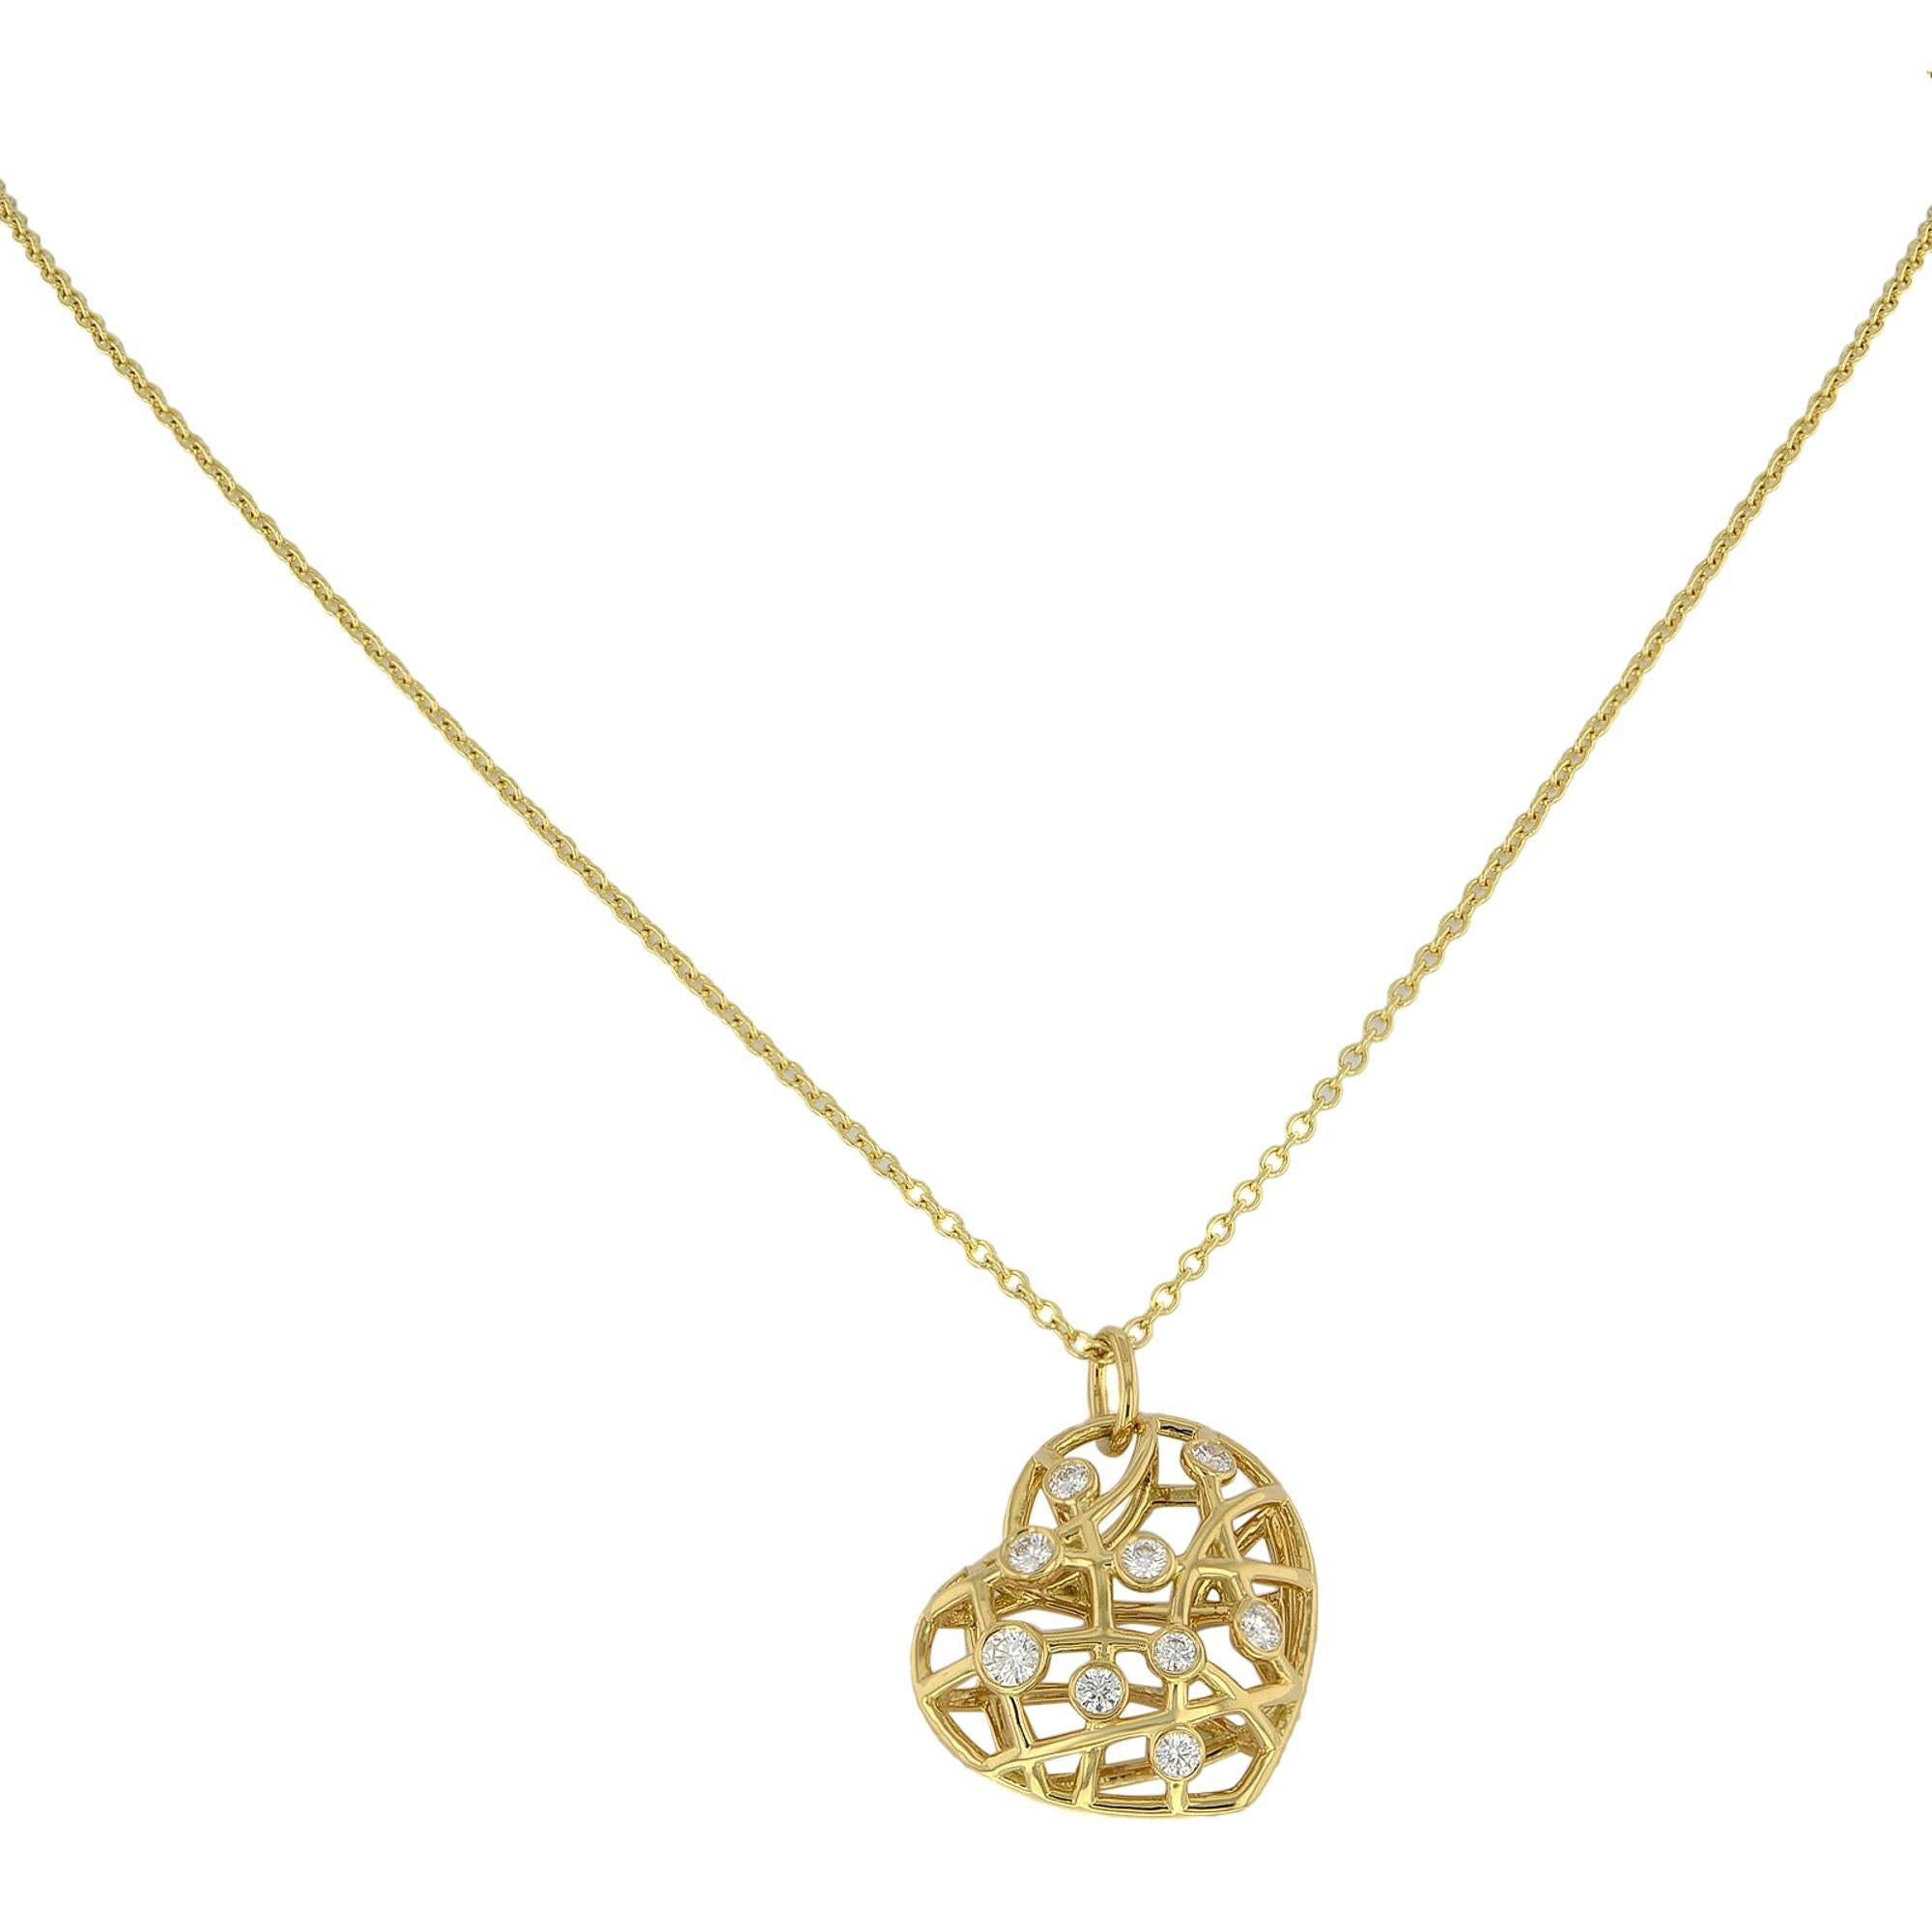 Hearts on Fire Diamond Chain Pendant Necklace 18K Yellow Gold 0.35Cttw